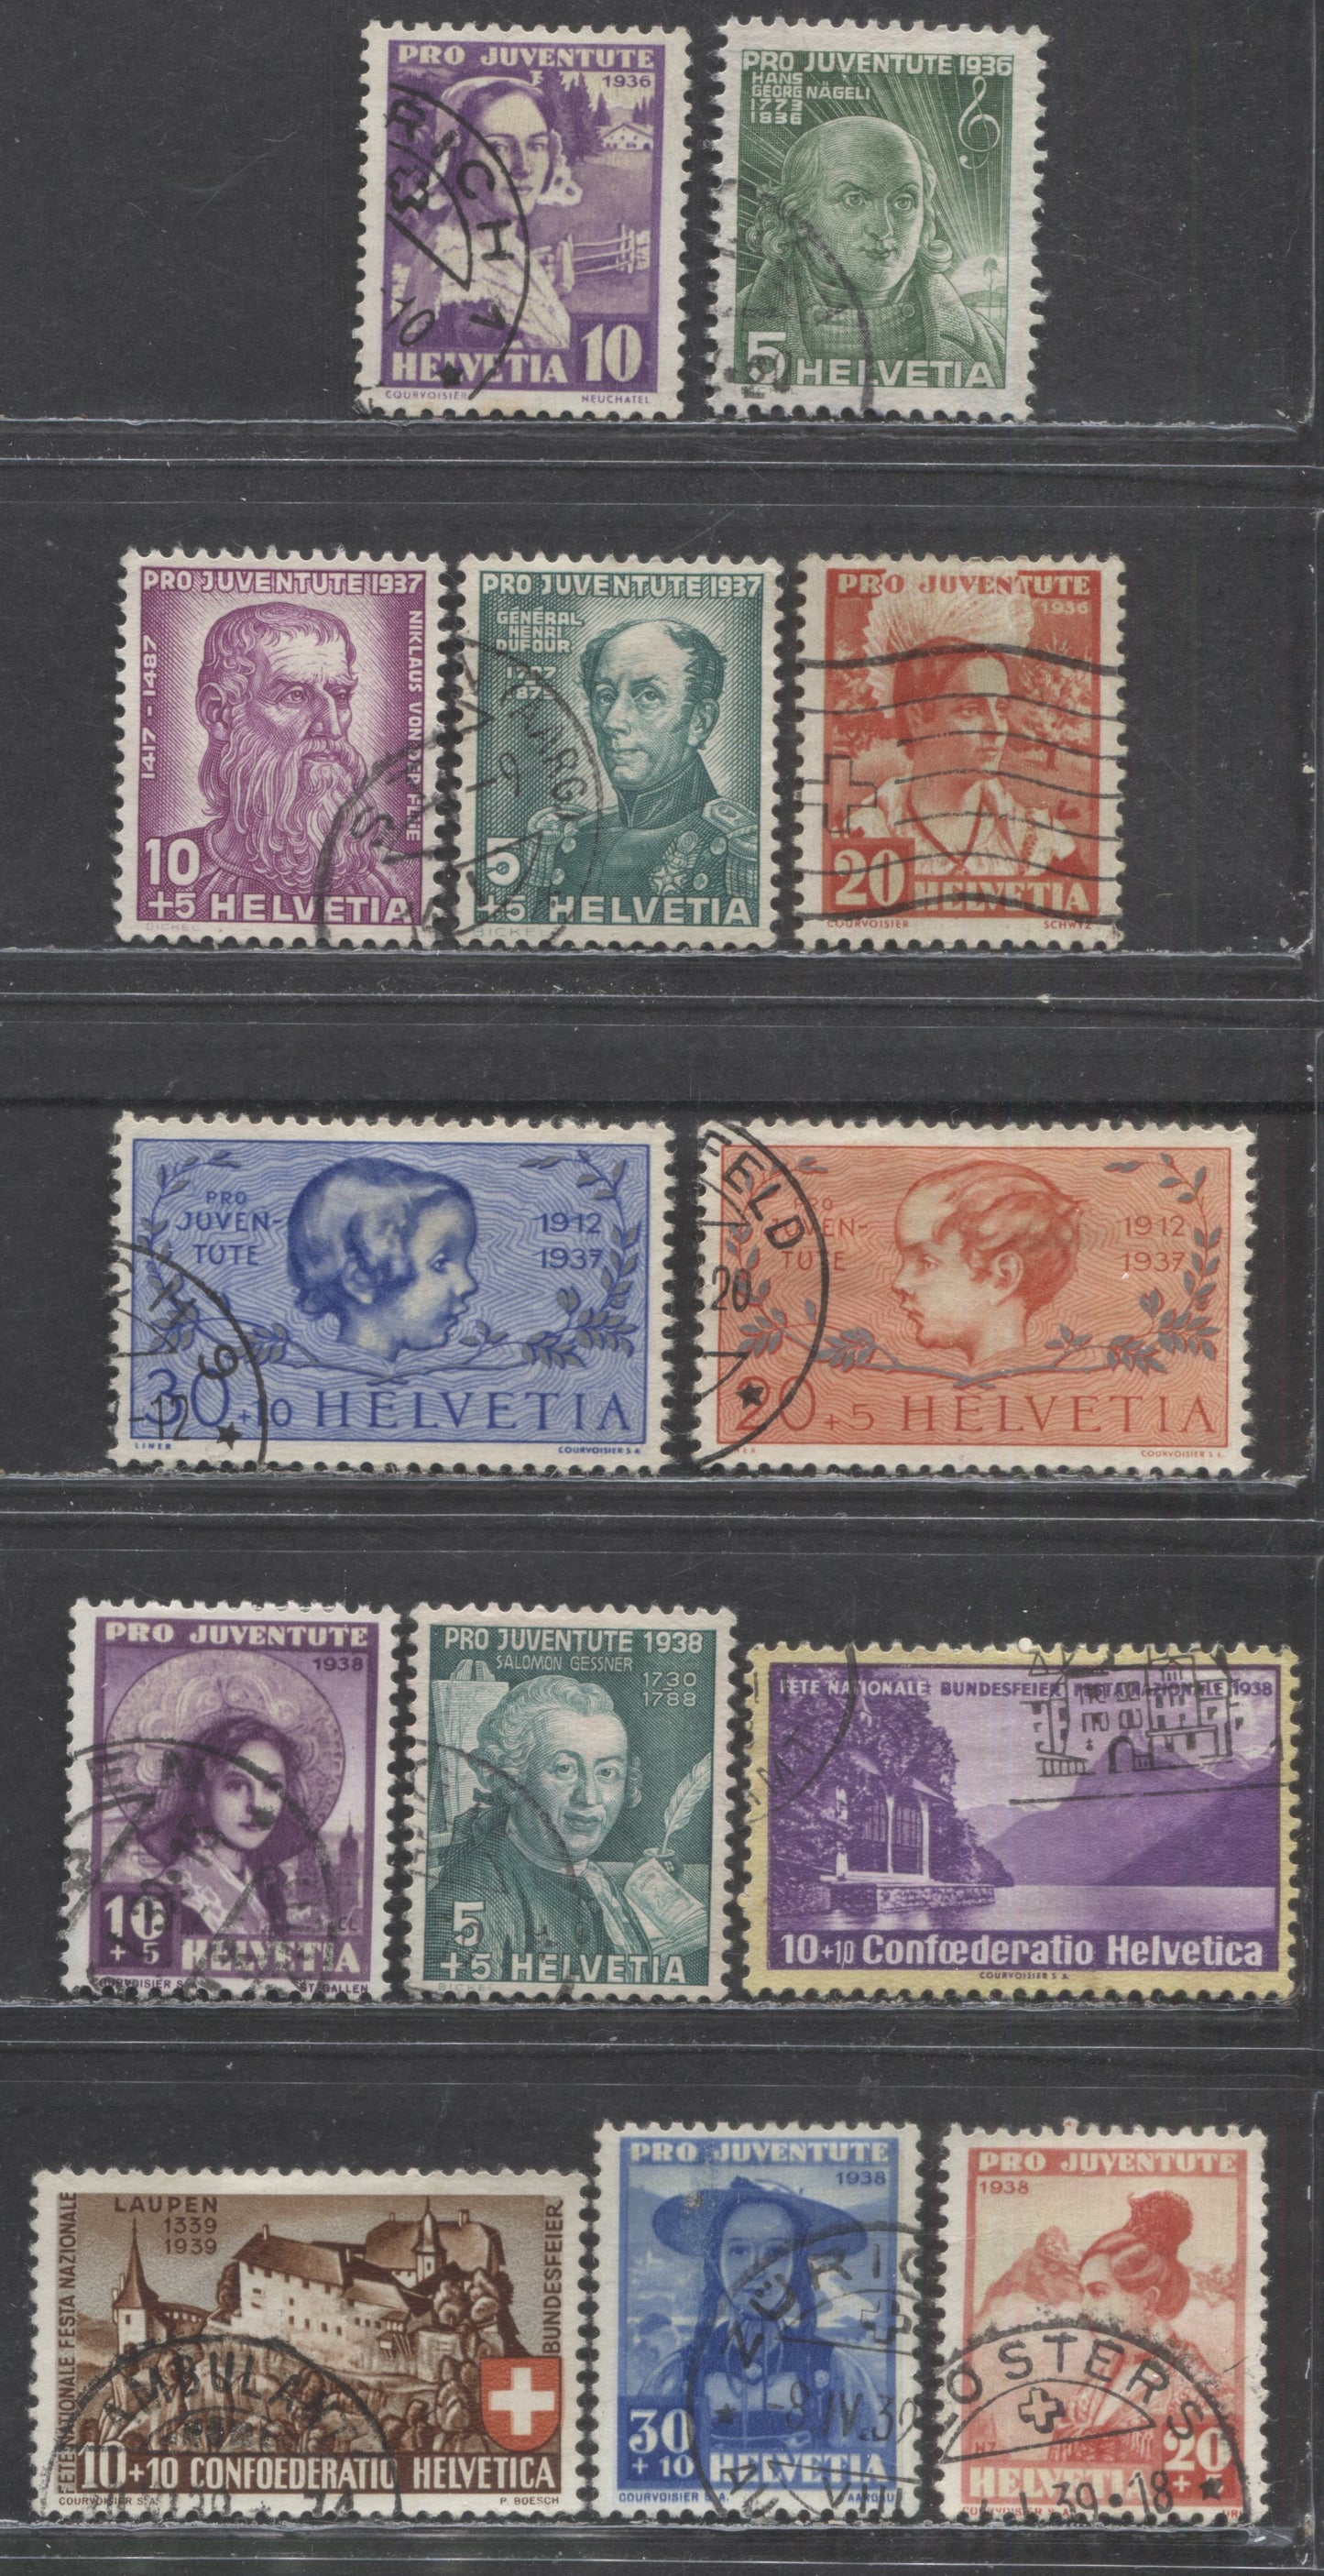 Lot 311 Switzerland SC#B81/B95 1936-1937 Semi Postals, 13 Fine/Very Fine Used Singles, Click on Listing to See ALL Pictures, 2022 Scott Classic Cat. $21.55 USD